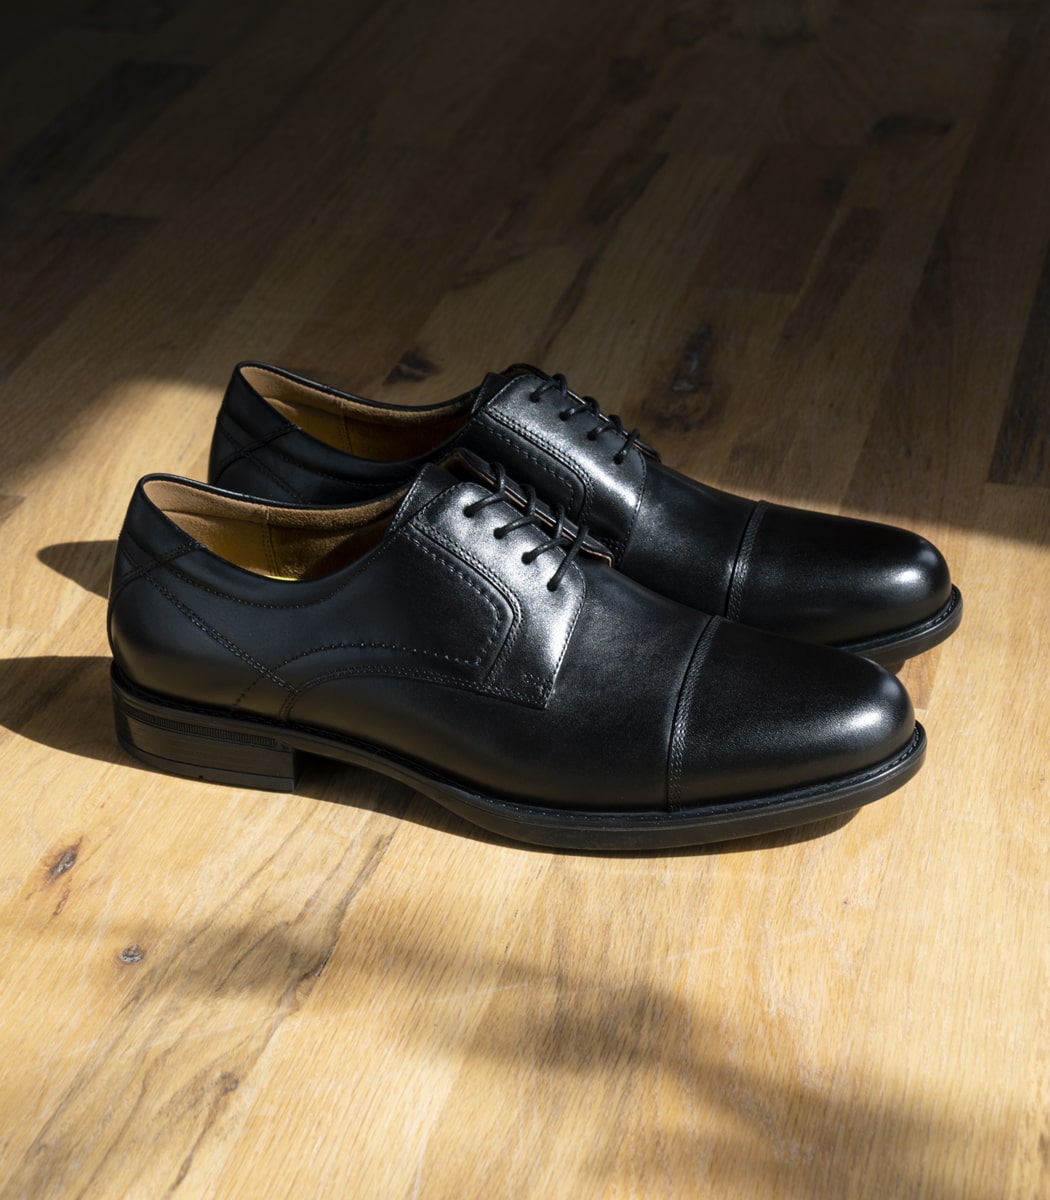 The featured product is the Midtown Cap Toe Oxford in Black.